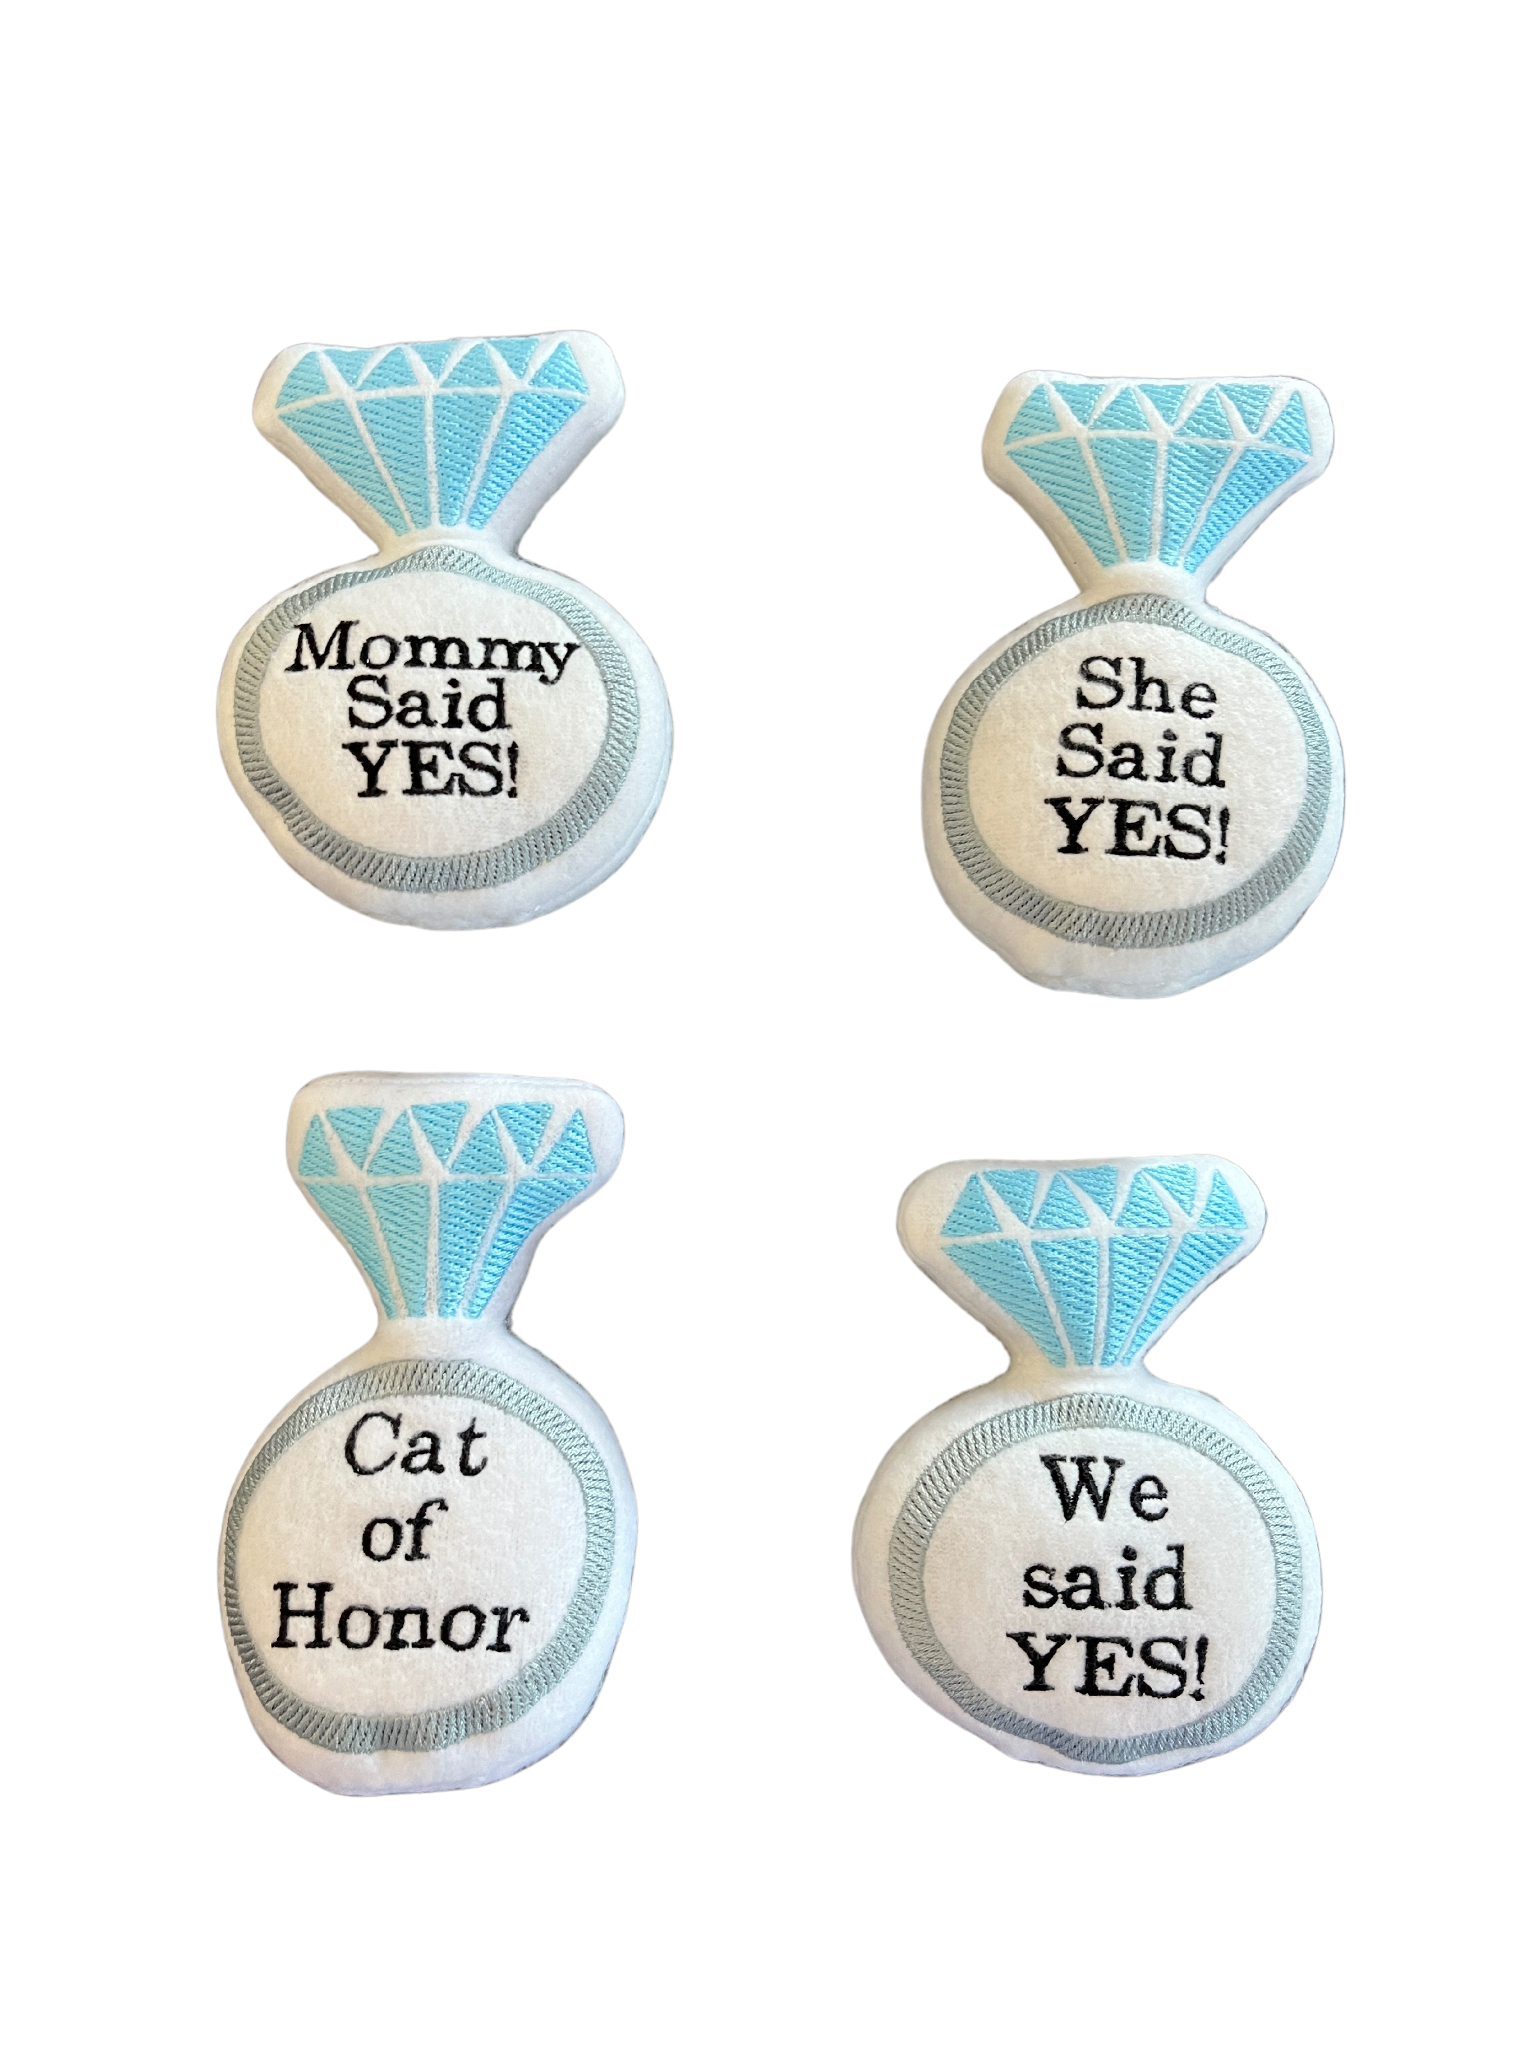 Engagement Ring Custom Cat Toy- Wedding Proposal Personalized Catnip Toy Cat Toys   